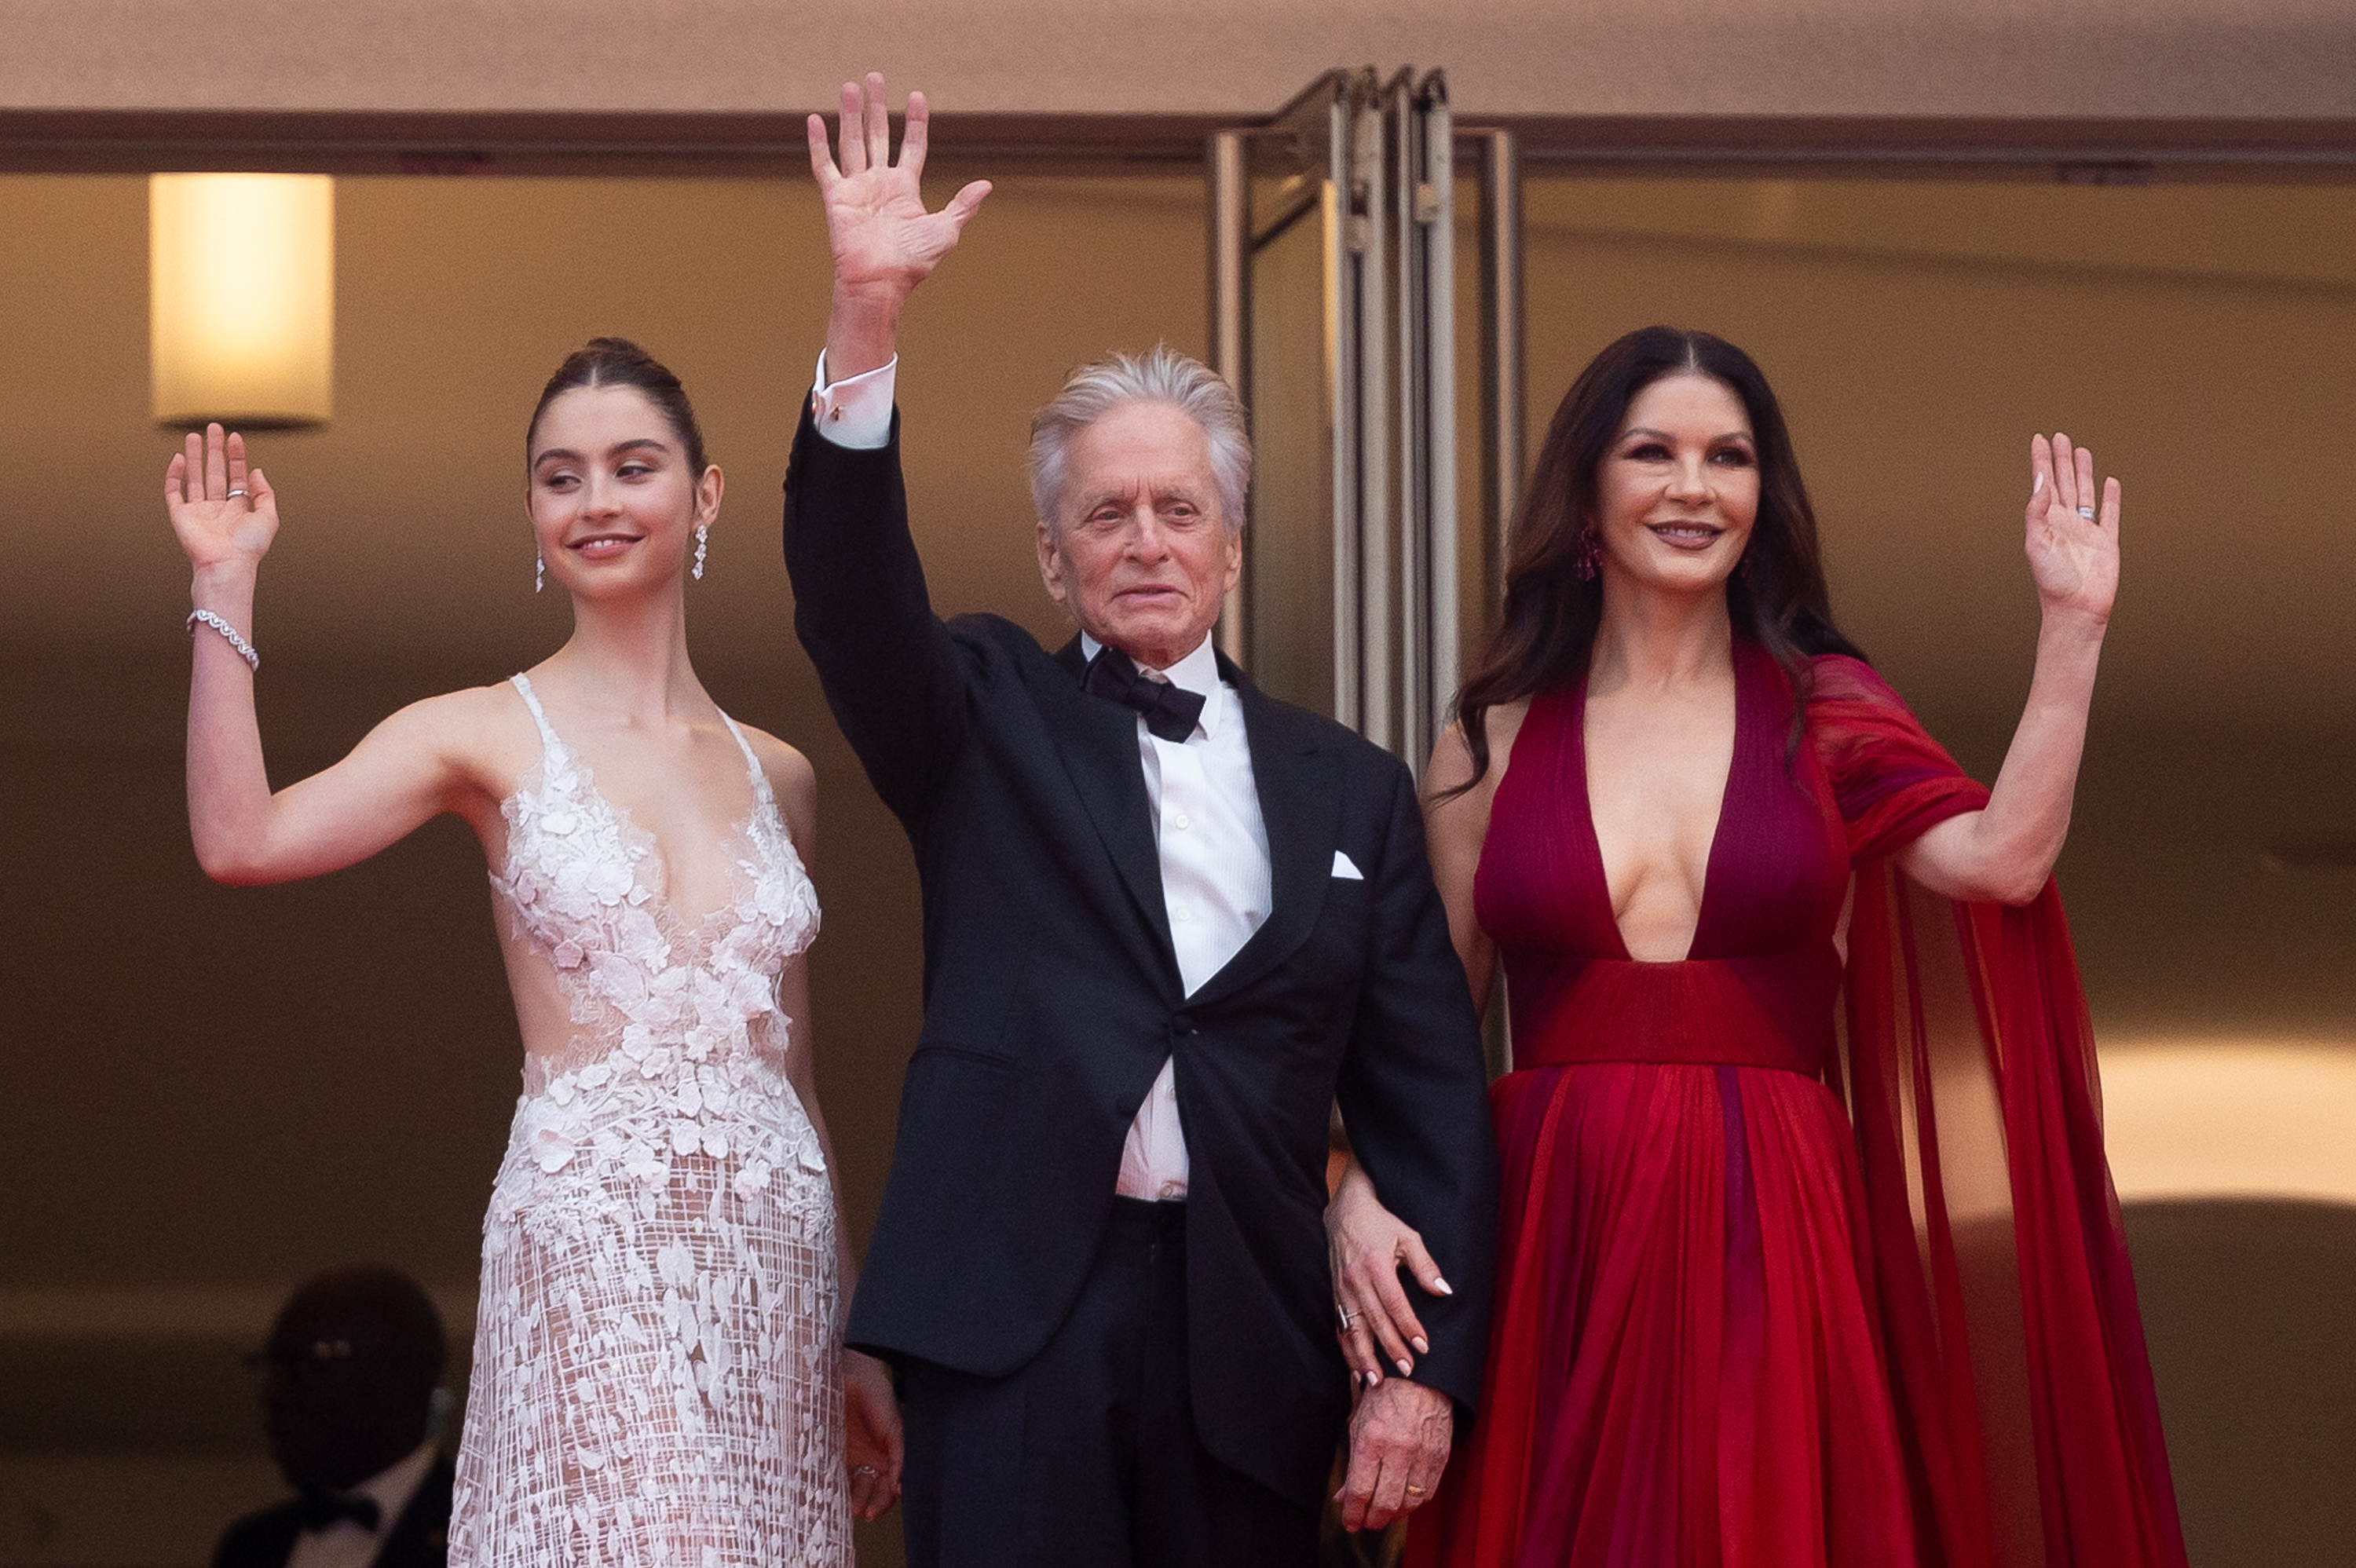 Carys Zeta Douglas, Michael Douglas, and Catherine Zeta-Jones at the "Jeanne du Barry" screening & opening ceremony at the 76th annual Cannes Film Festival on May 16, 2023, in Cannes, France | Source: Getty Images